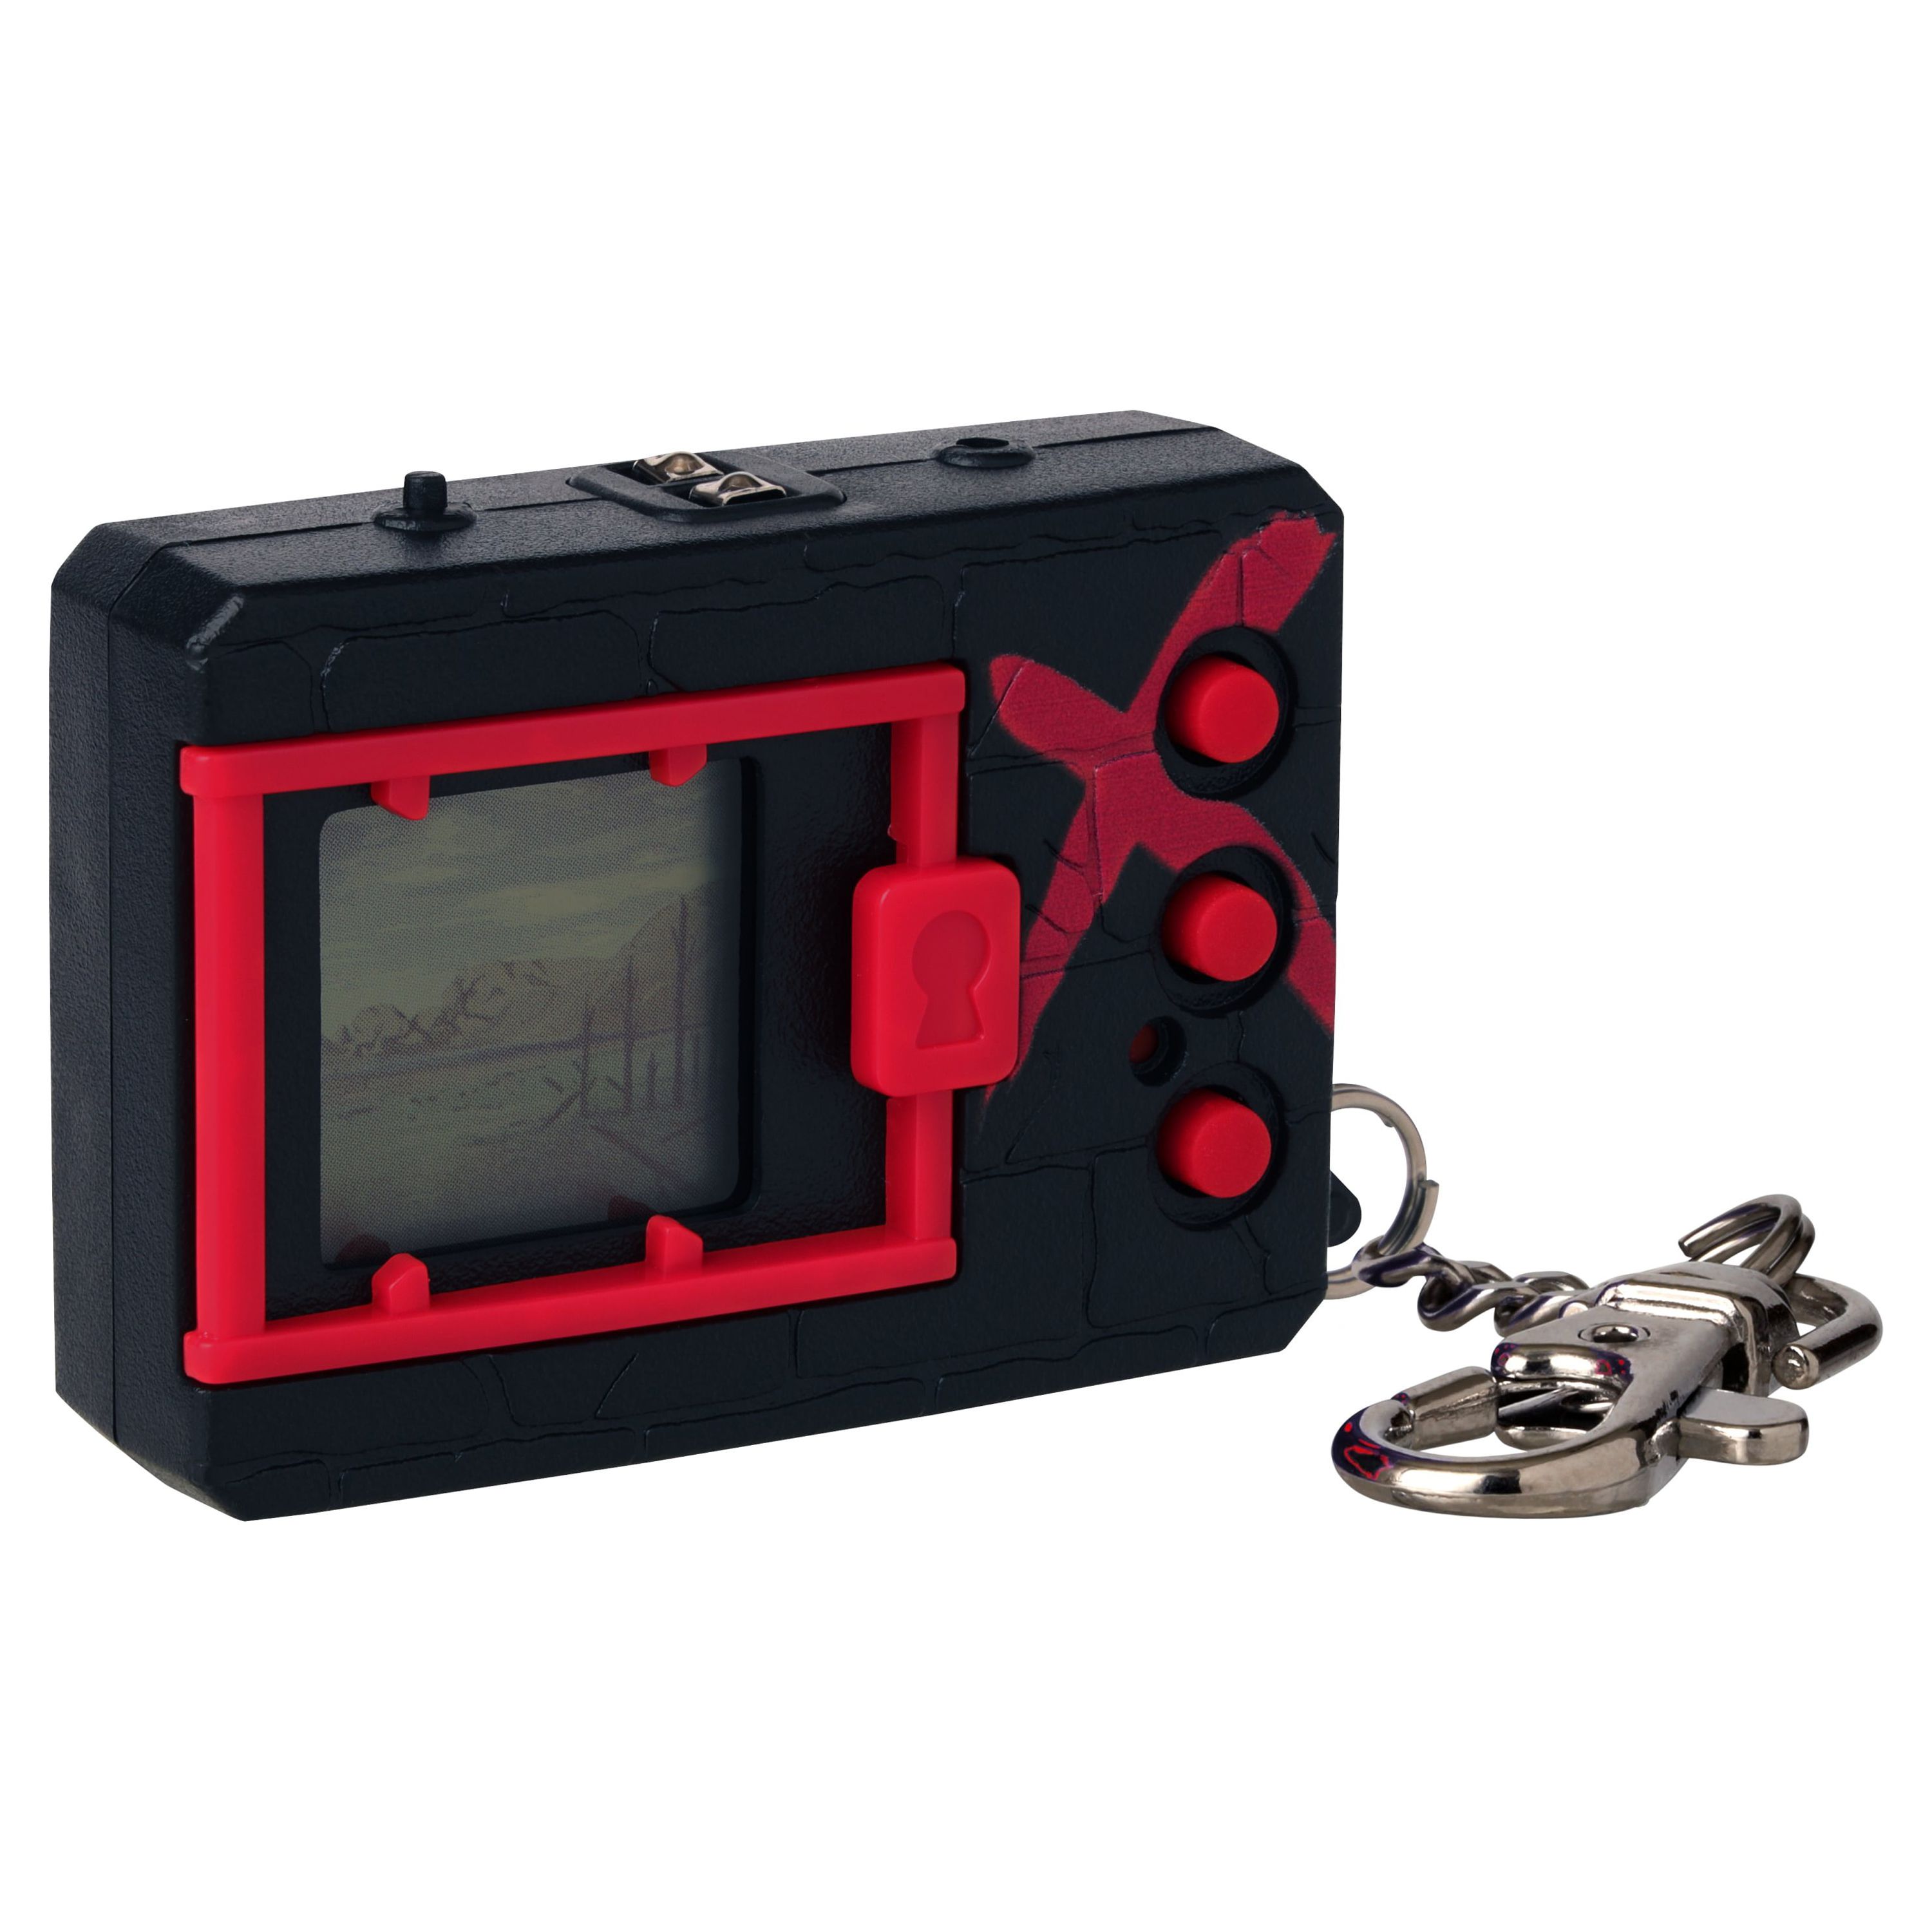 Digimon X Electronic Monster Toy ( Black & Red) - image 3 of 5